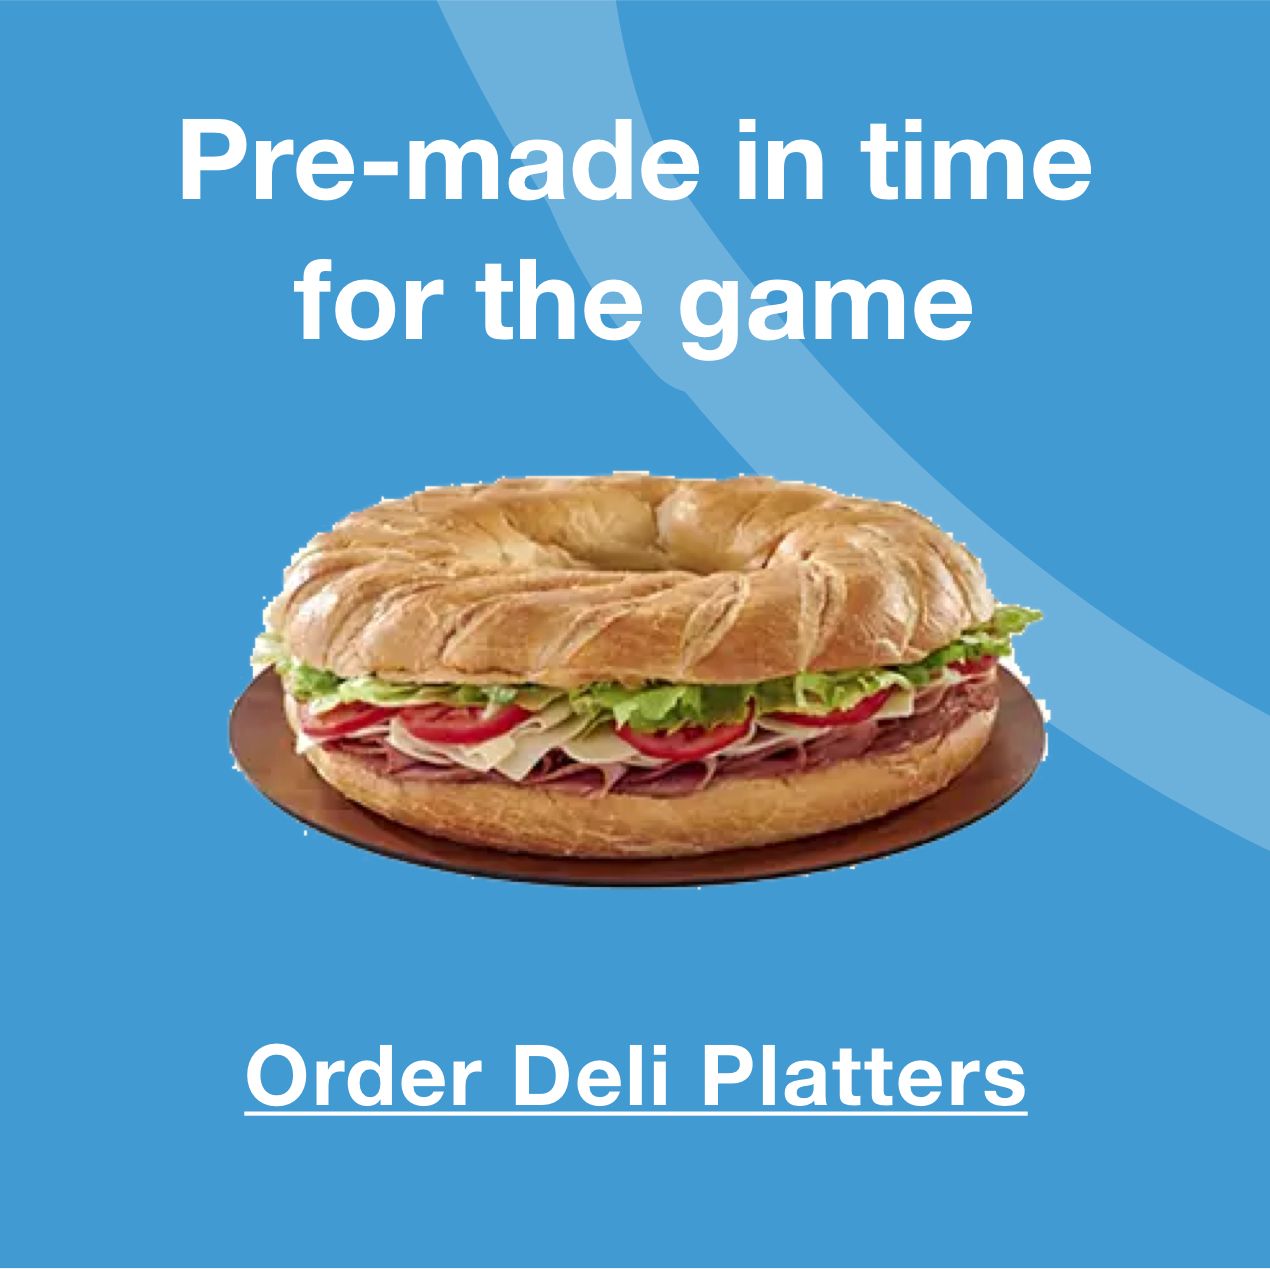 Pre-made in time for kickoff. Click to order deli platters